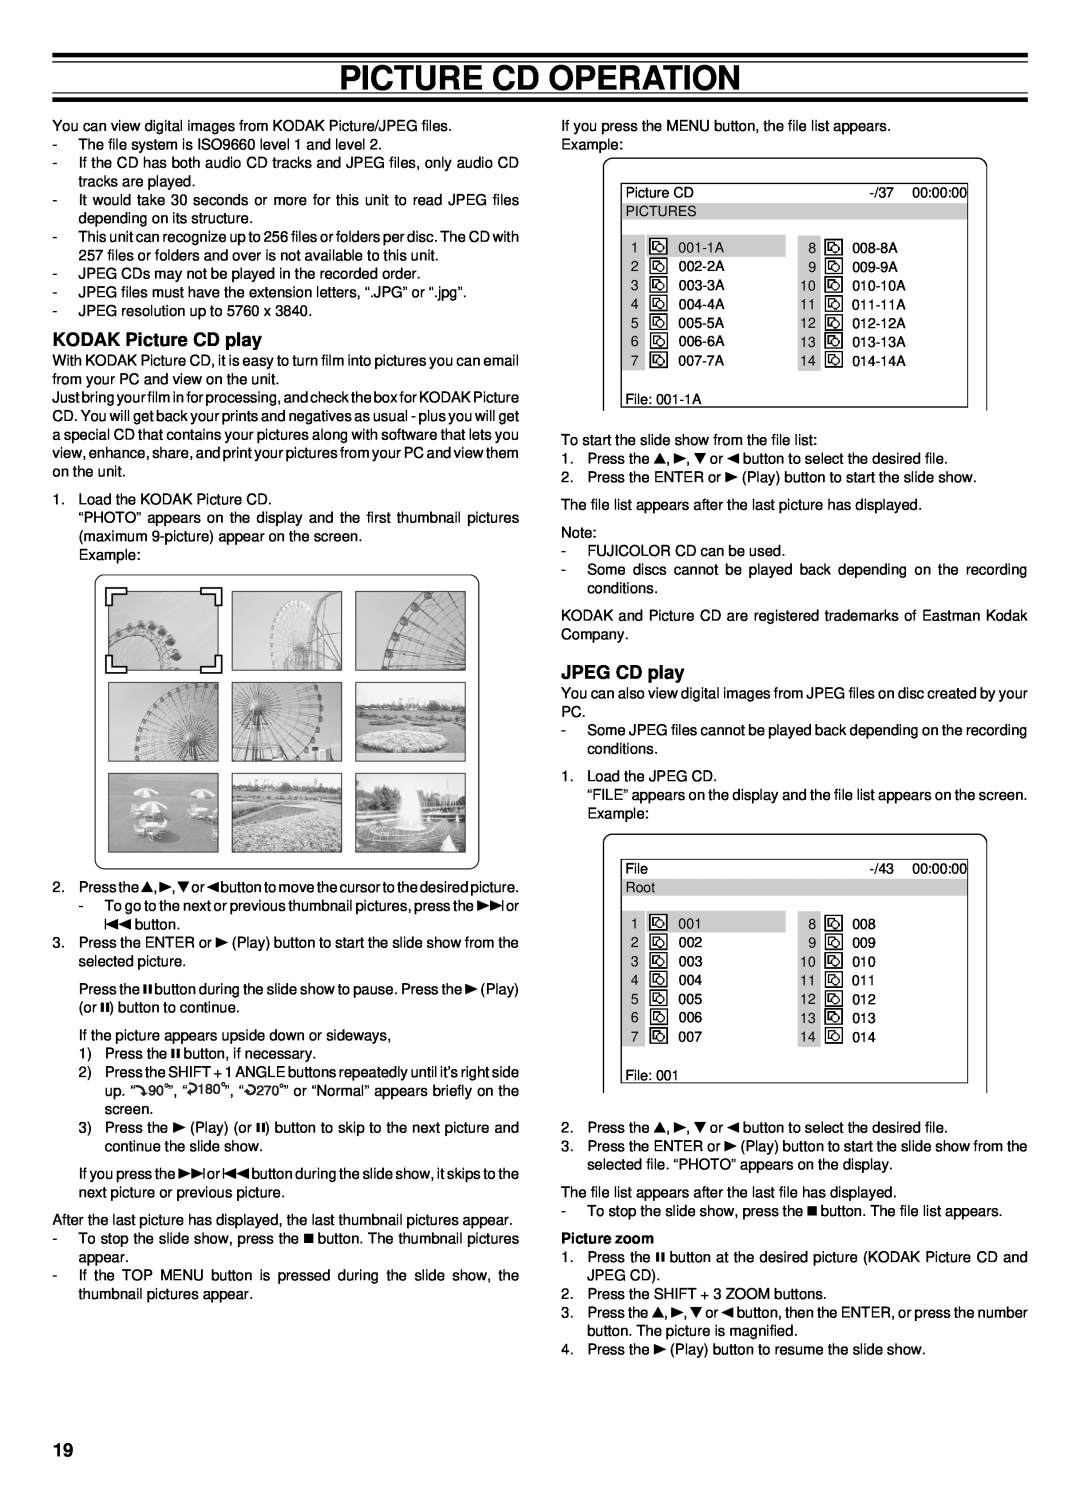 Sanyo DC-TS760 instruction manual Picture Cd Operation, KODAK Picture CD play, JPEG CD play, Picture zoom 